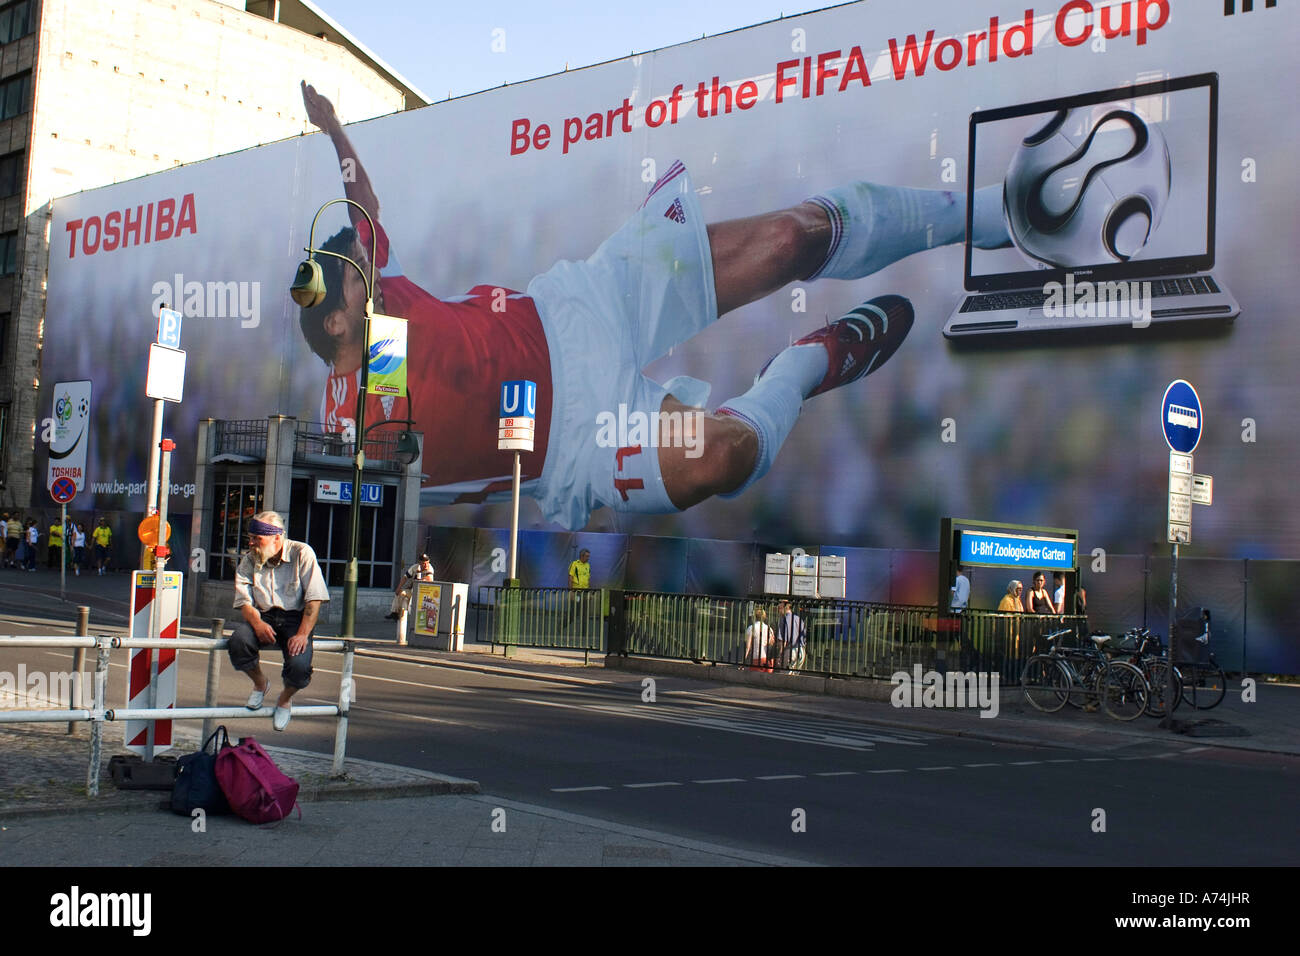 A man resting in Berlin possibly homeless in  front of World Cup billboard Summer 2006 Stock Photo